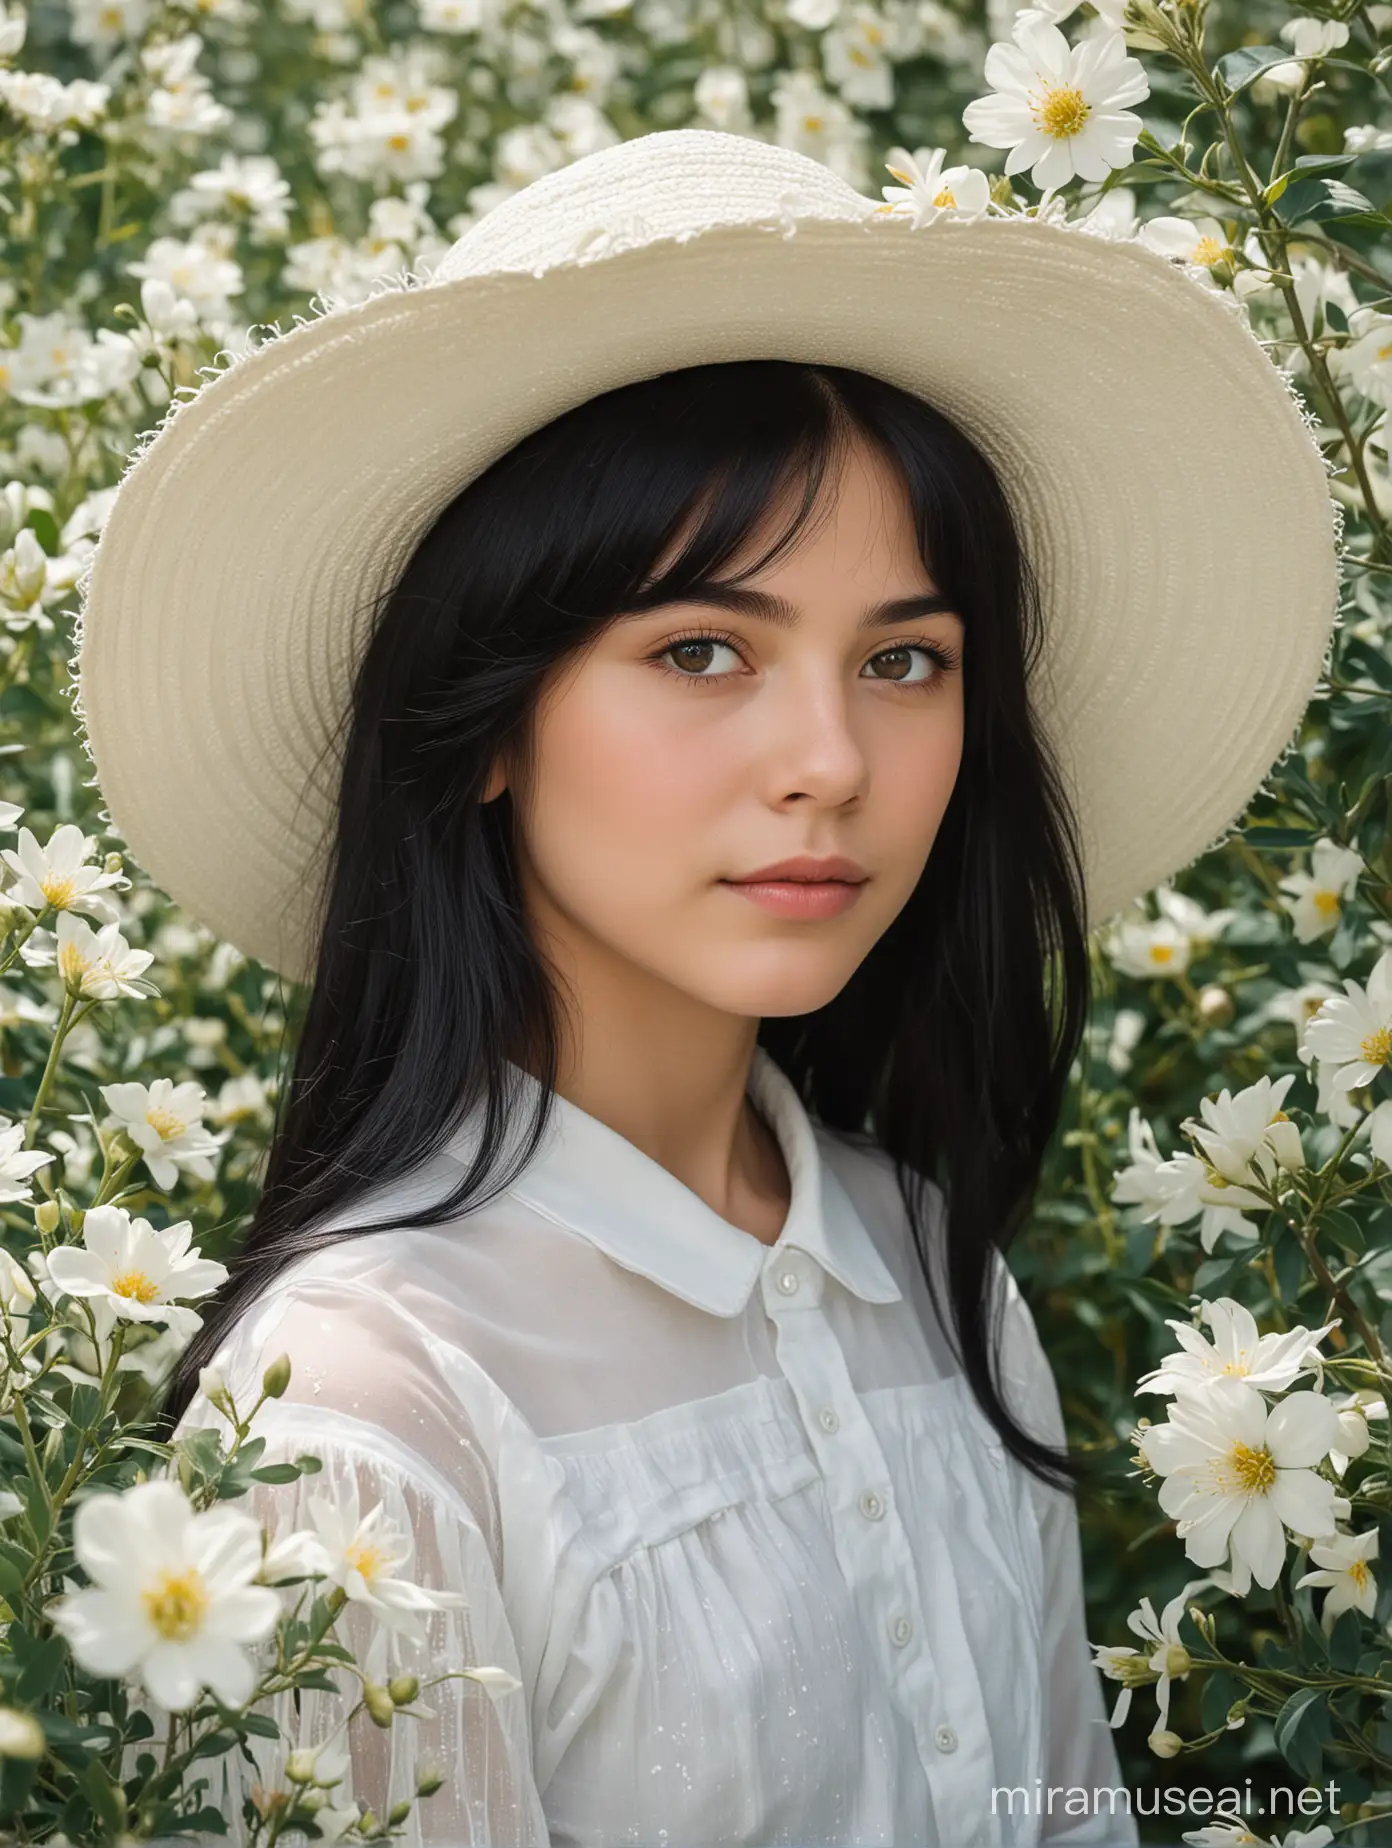 BlackHaired Girl in White Hat Amidst Blossoms